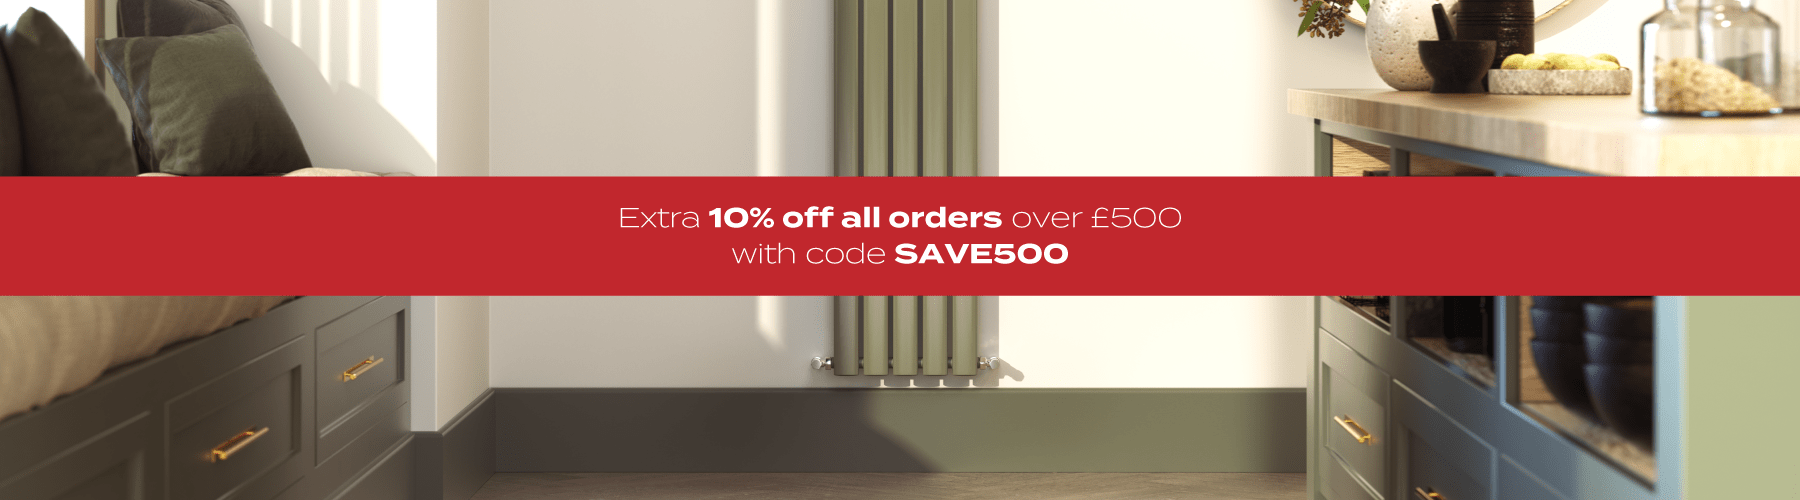  Plus an additional 10% off all orders over £500 with code SAVE500 